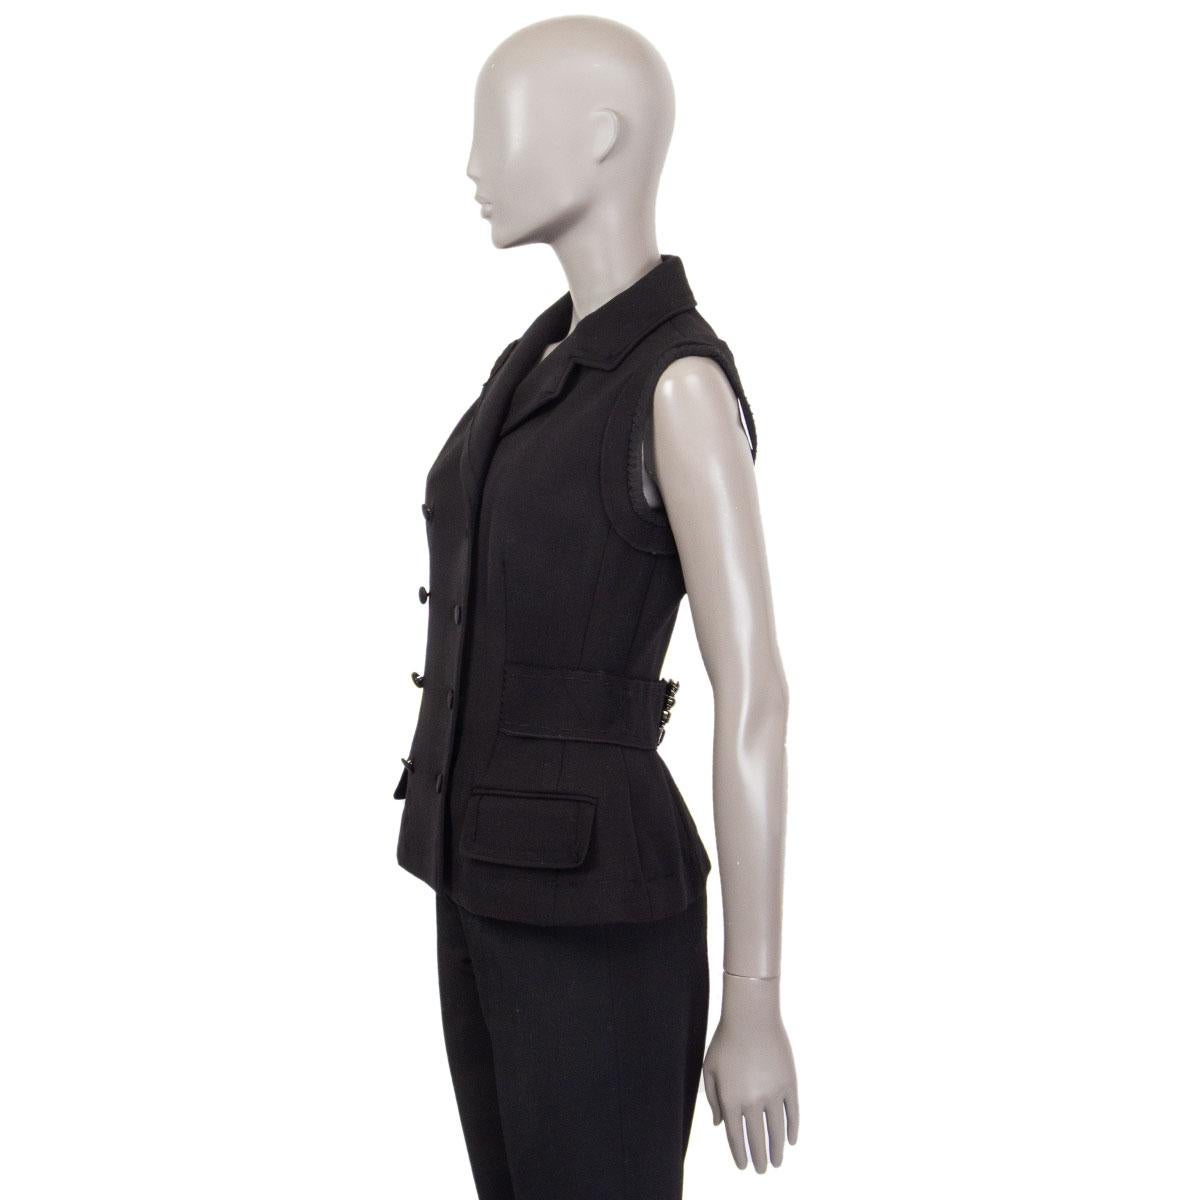 100% authentic Dolce & Gabbana double-breasted vest in black (probably wool blend) with stitching details, fringed hemline, notch collar, two flap pockets and a waist belt at the back with an embellished buckle. Closes with round black buttons in